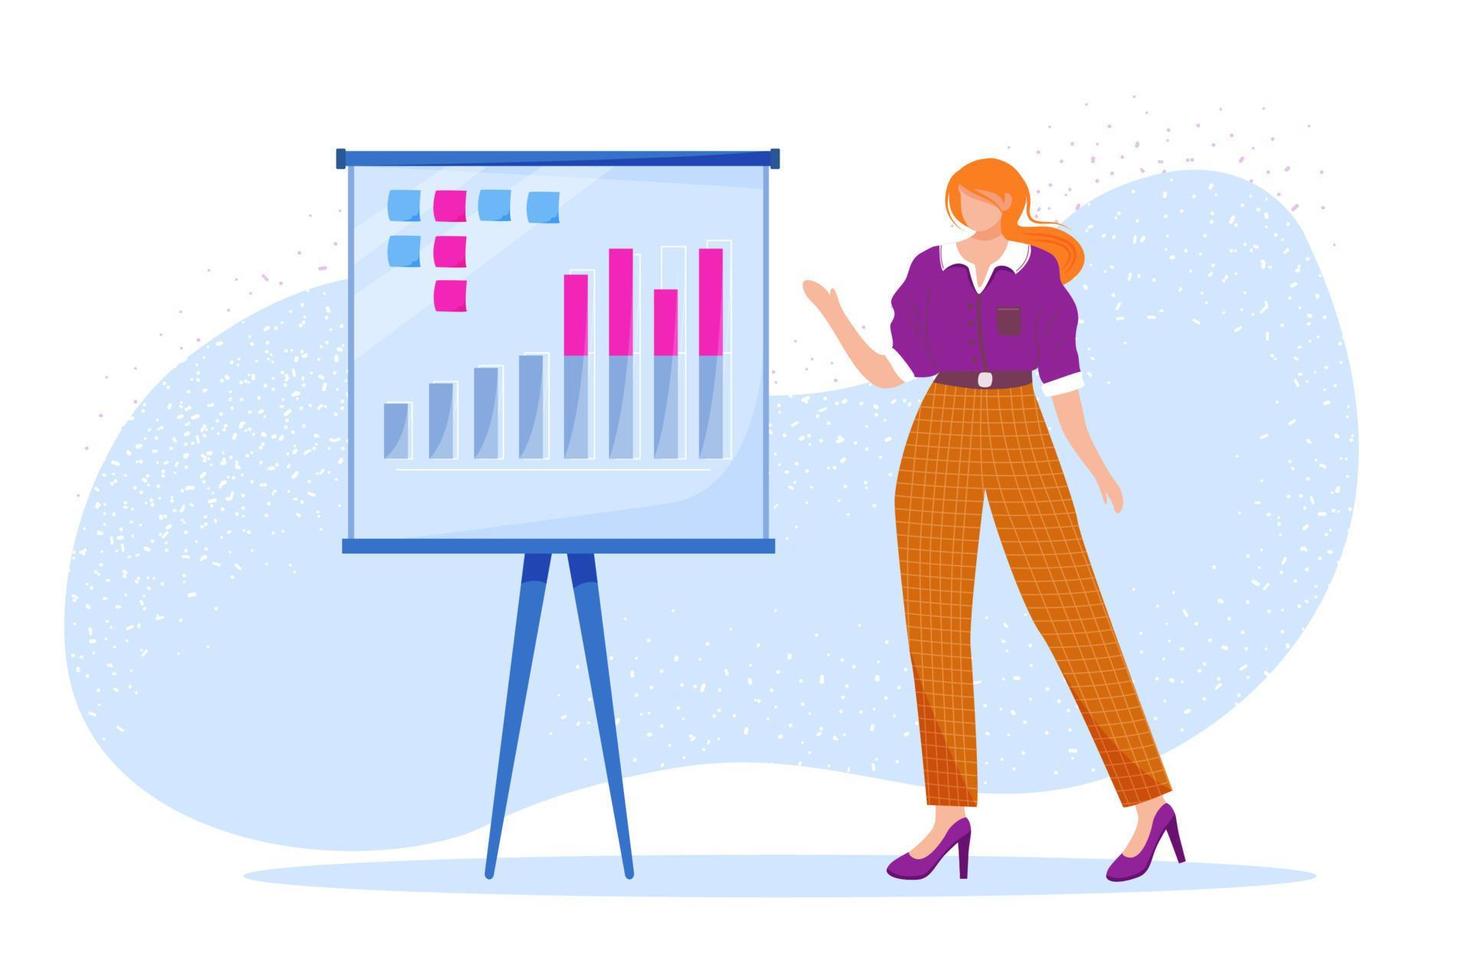 Business presentation flat vector illustration. Office worker presenting annual report. Employee speaking about company performance statistics. Faceless cartoon character on white and blue background